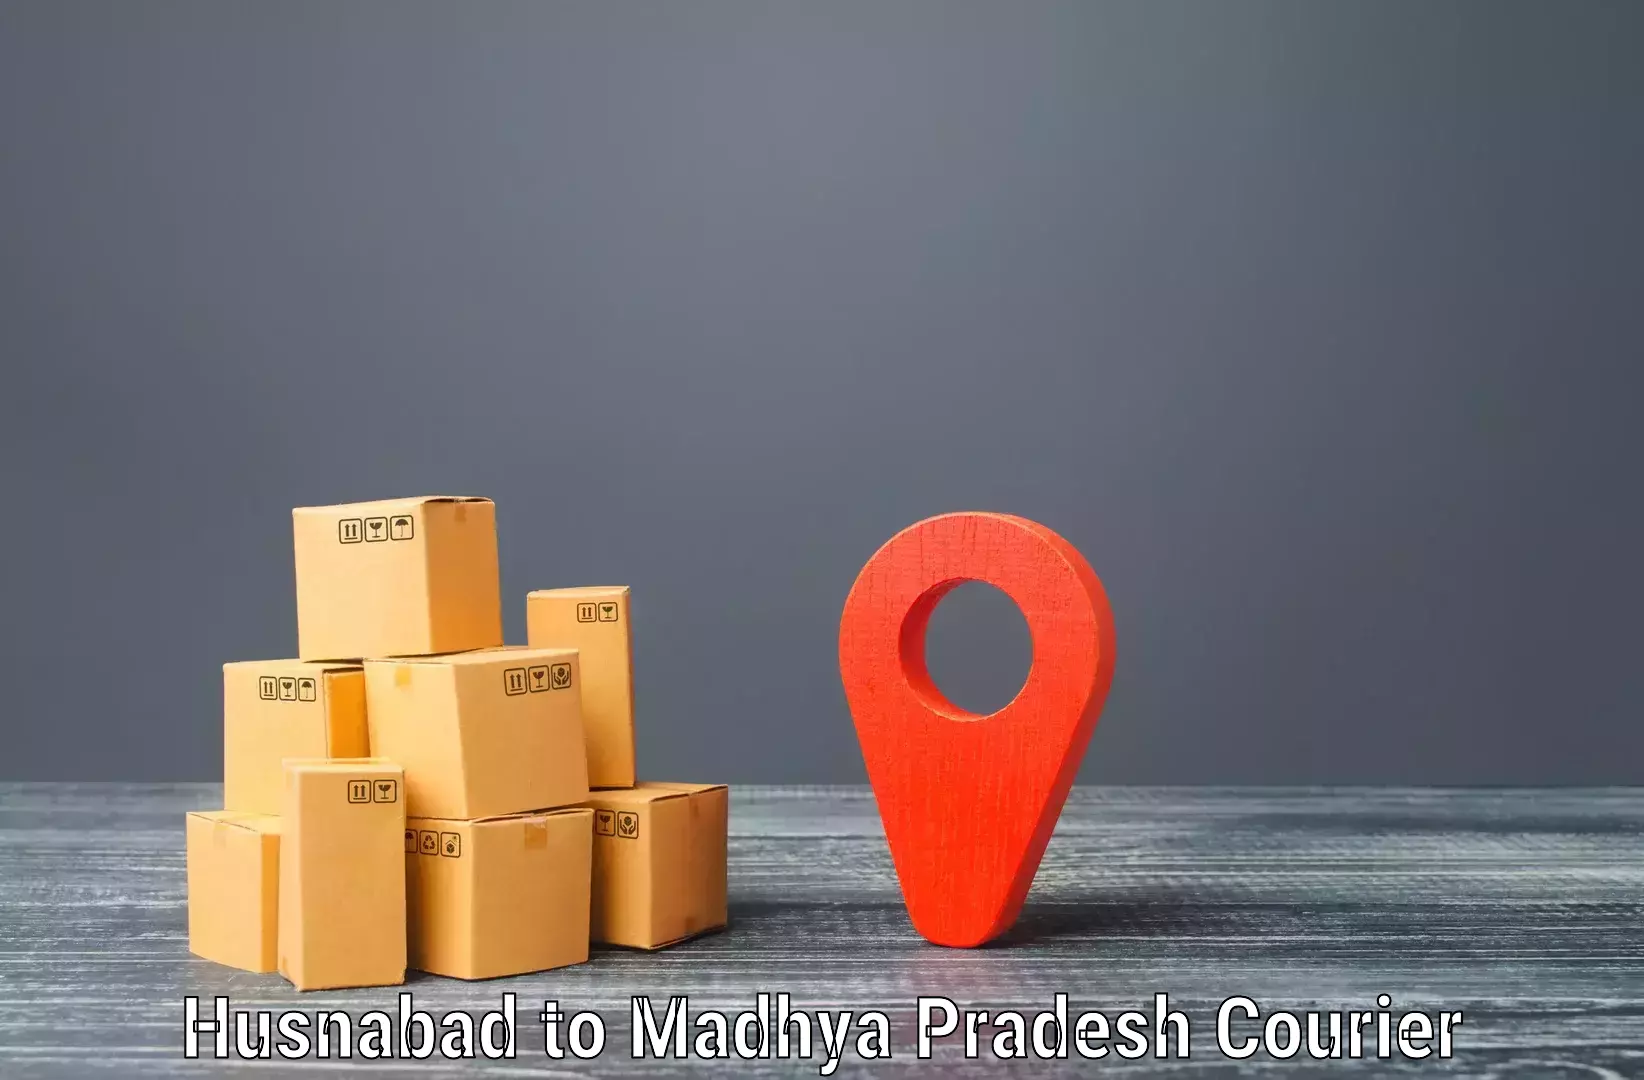 Reliable courier service in Husnabad to BHEL Bhopal